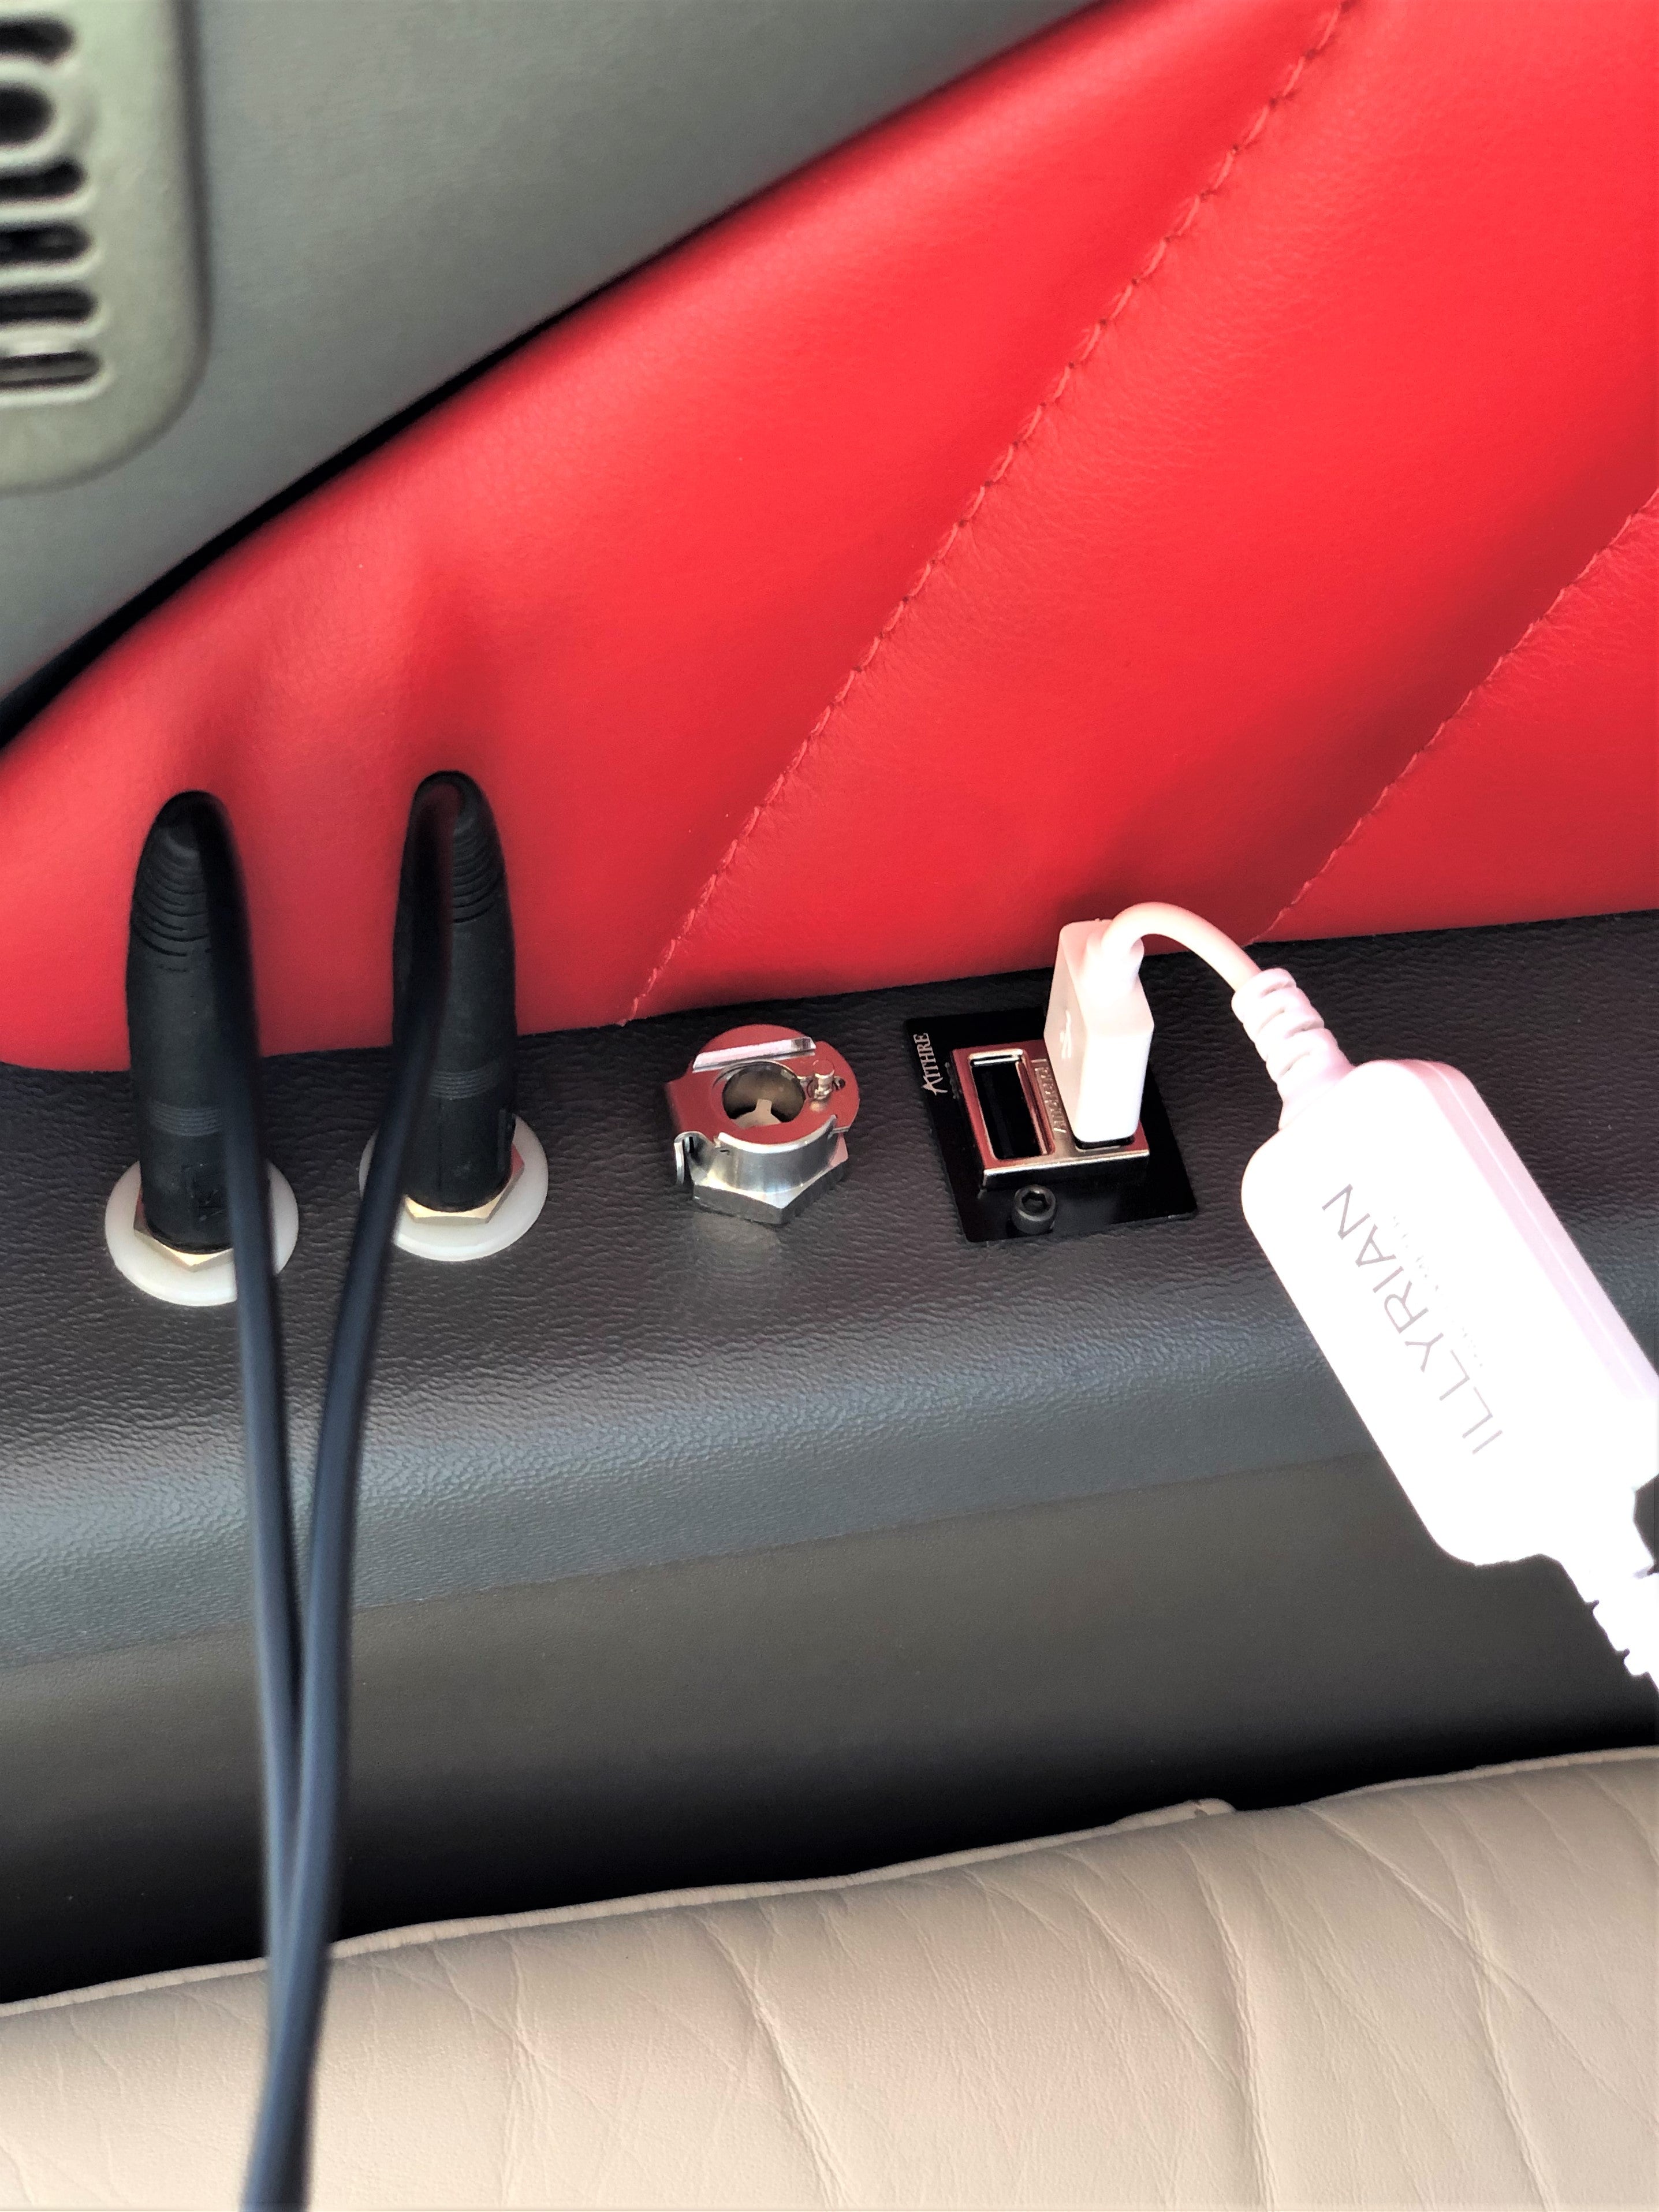 10 USB Outlets for the RV-10!